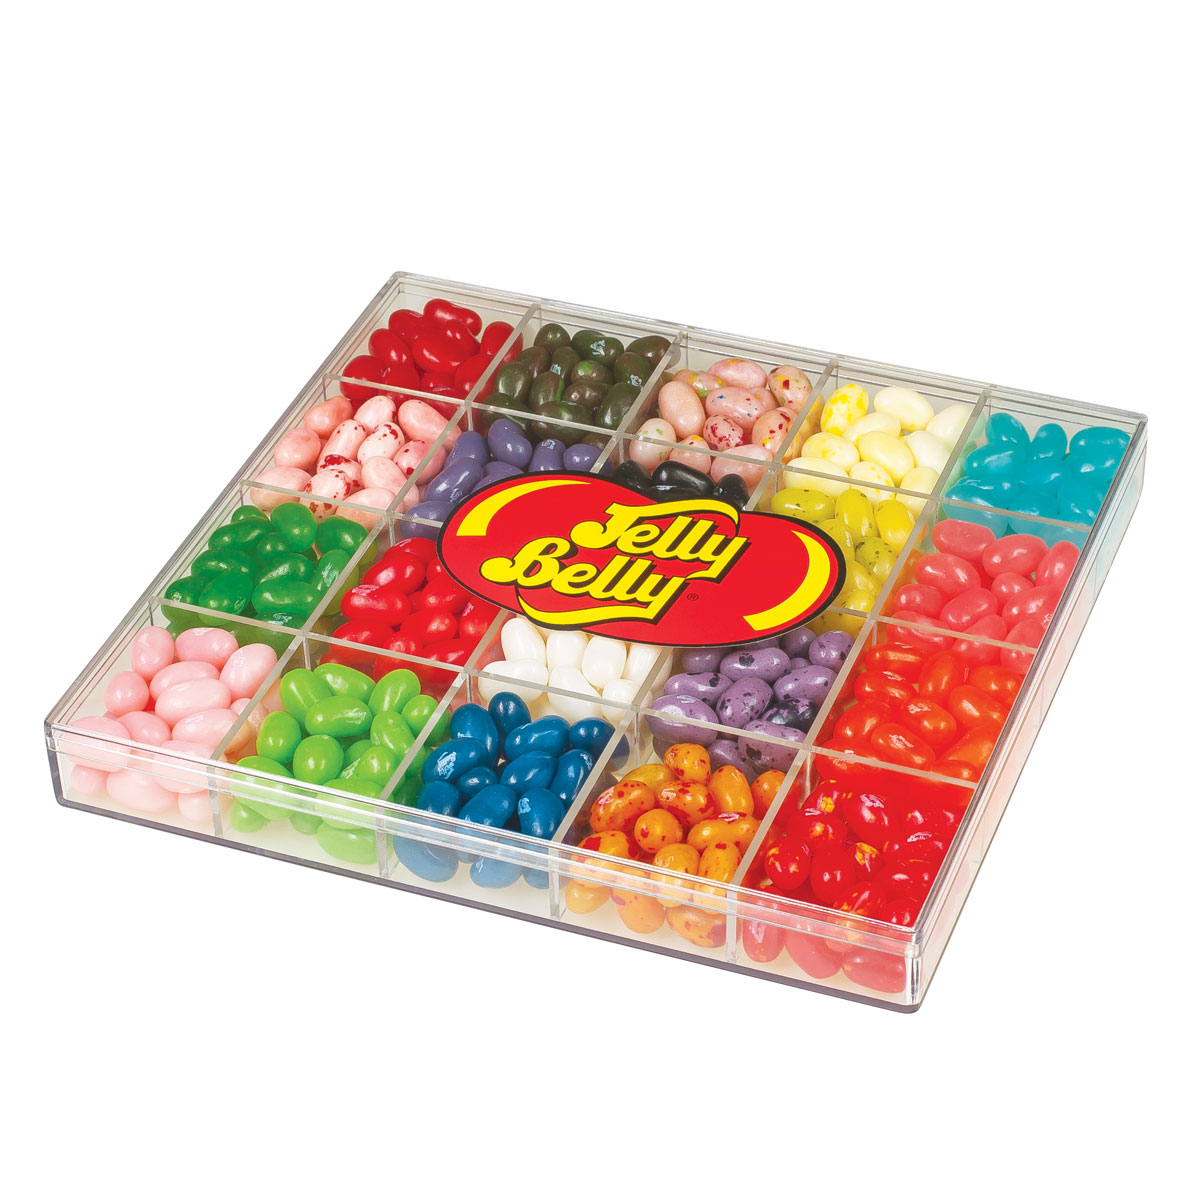 Sweet greetings come in a marvelous collection of 20 flavors of Jelly  Belly jelly beans; each flavor nestled in its own pocket. Very Cherry;  Juicy Pear; and Cotton Candy are among the dazzling flavors. Find fun and tasty ways to  combine flavors to make your own taste sensations!